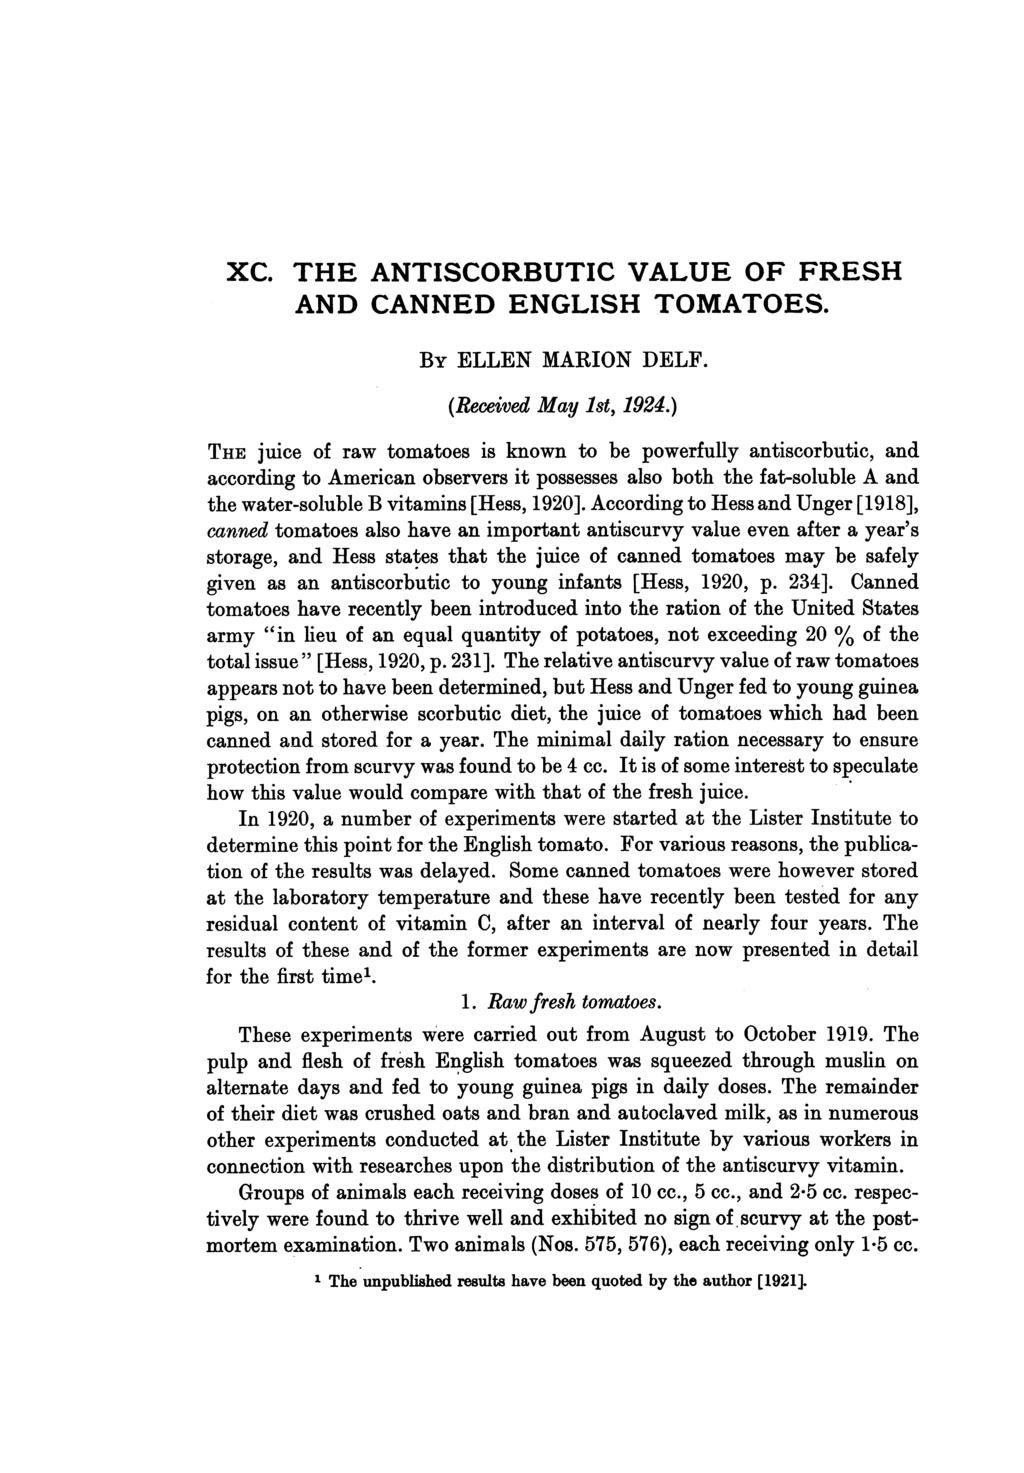 XC. THE ANTISCORBUTIC VALUE OF FRESH AND CANNED ENGLISH TOMATOES. BY ELLEN MARION DELF. (Received May 1st, 1924.